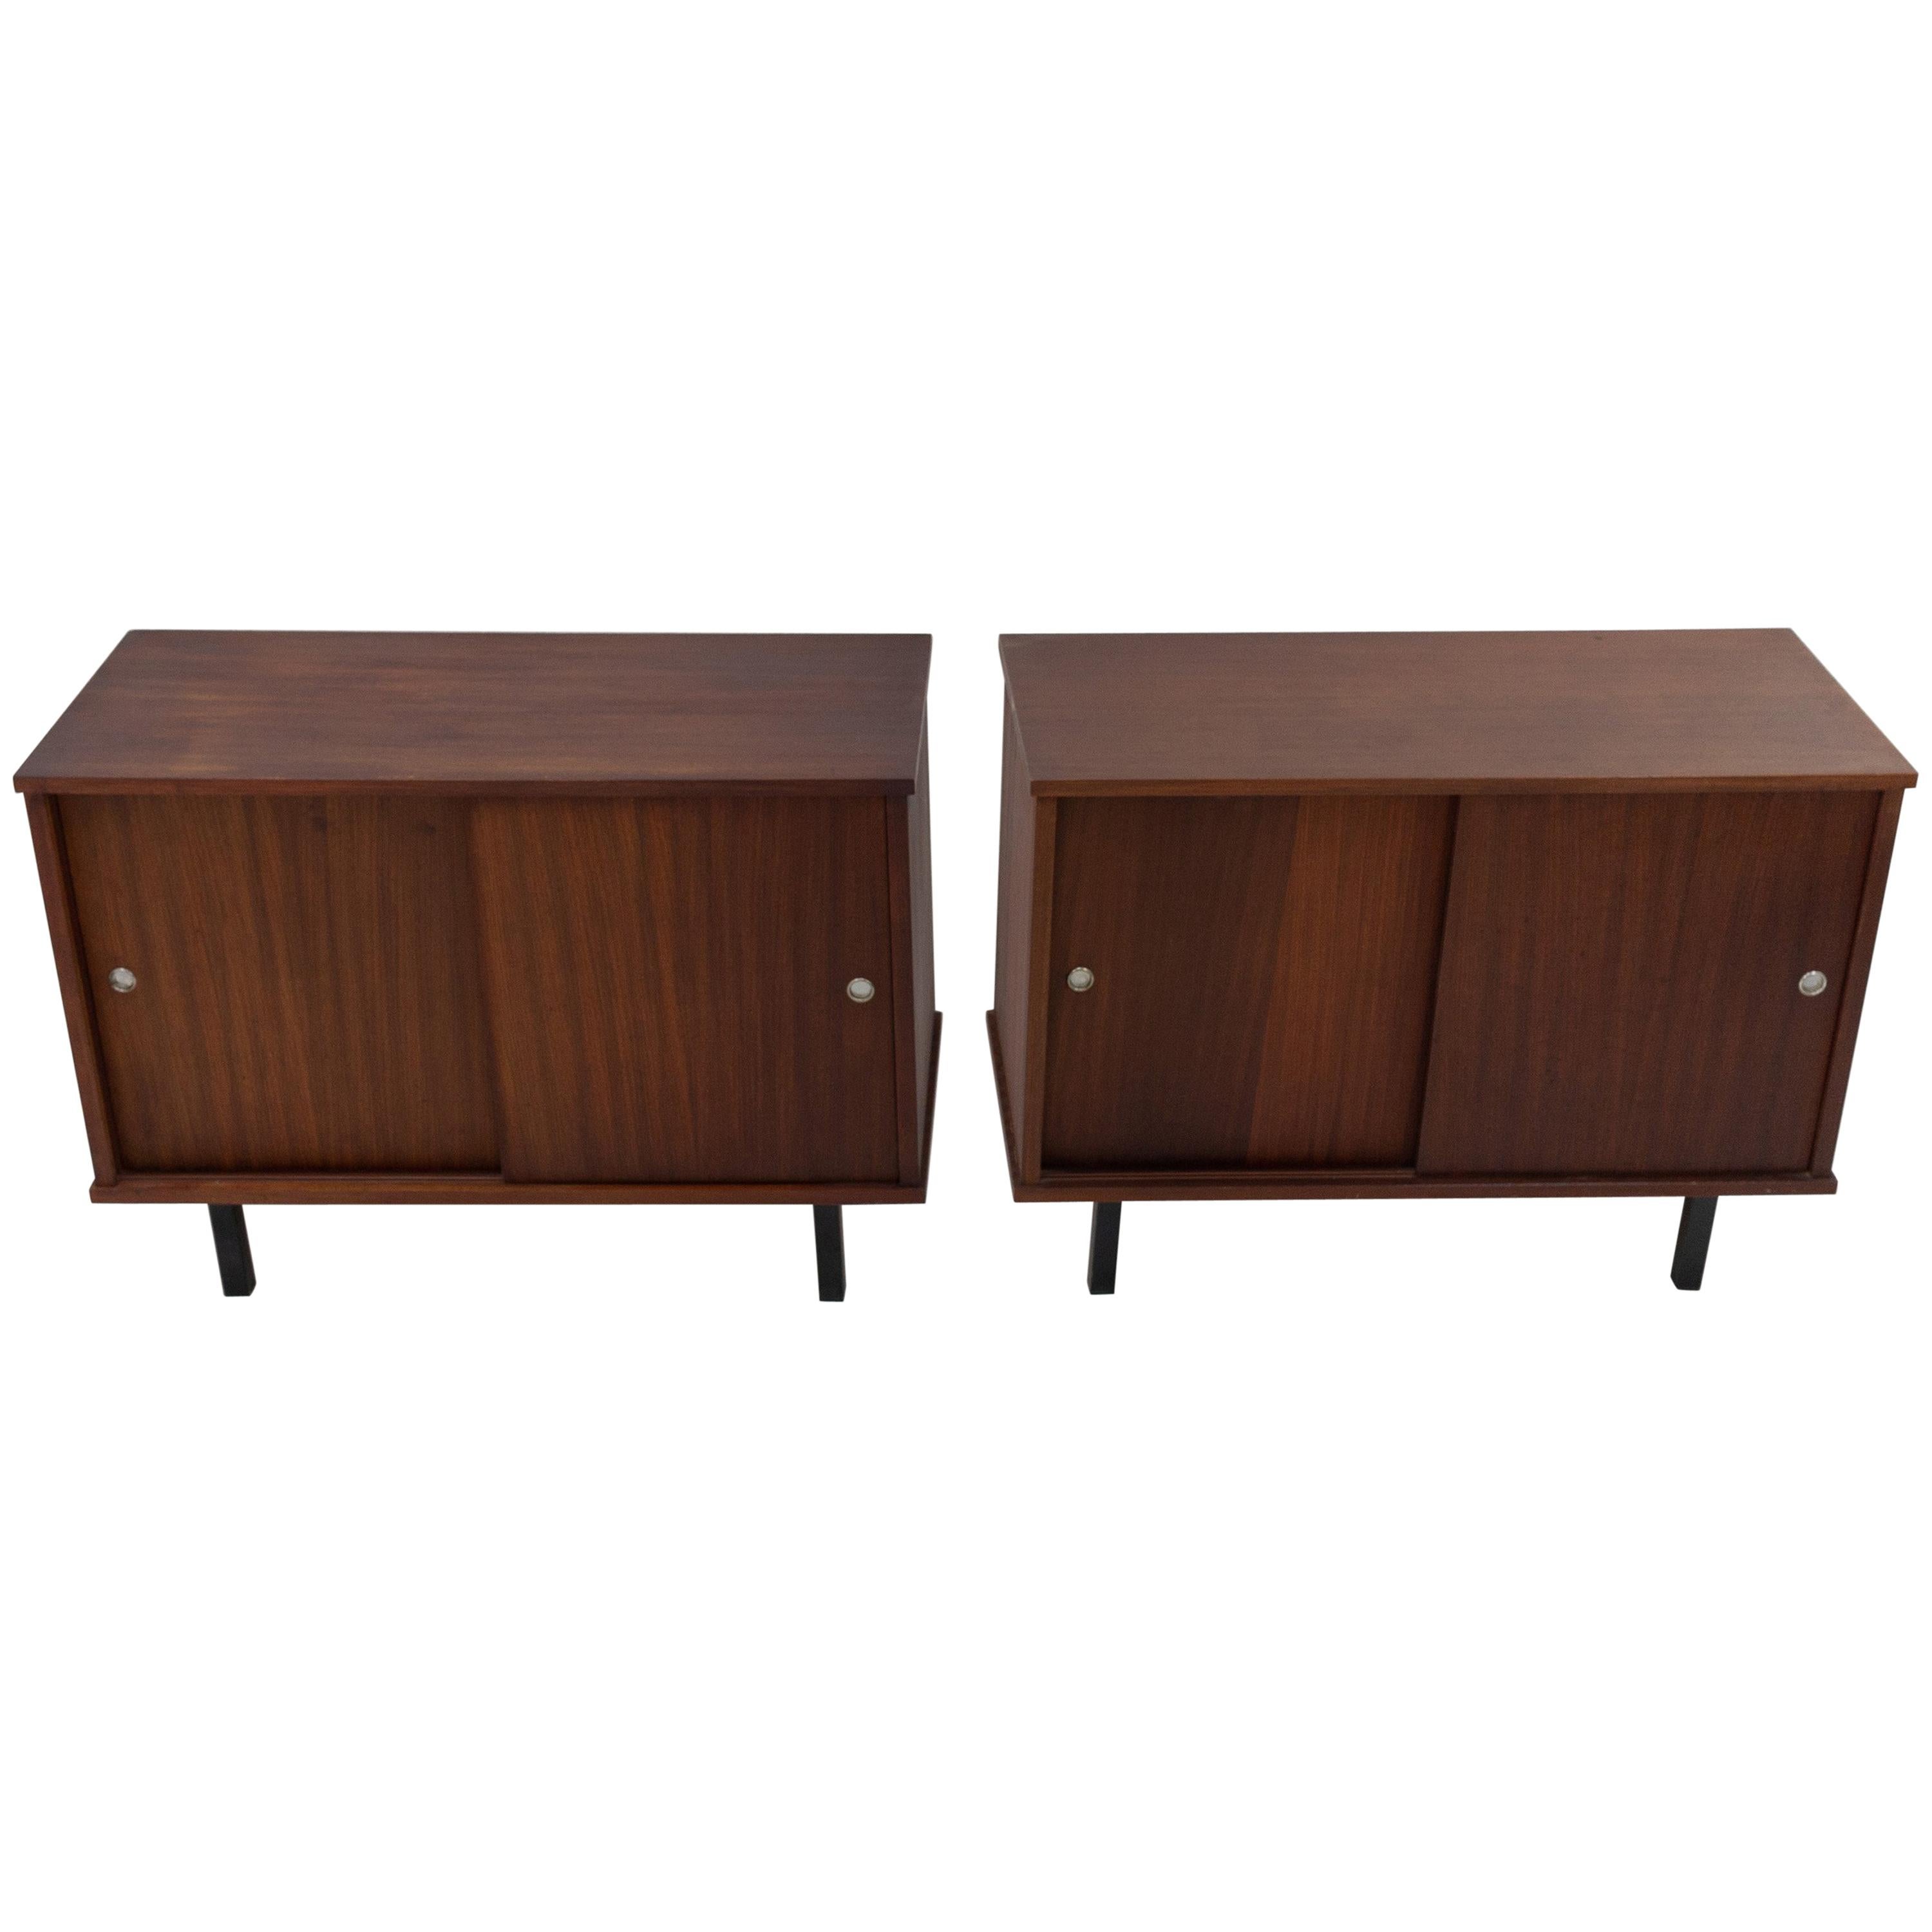 Pair of Cabinets with Sliding Doors, Dutch 1960s